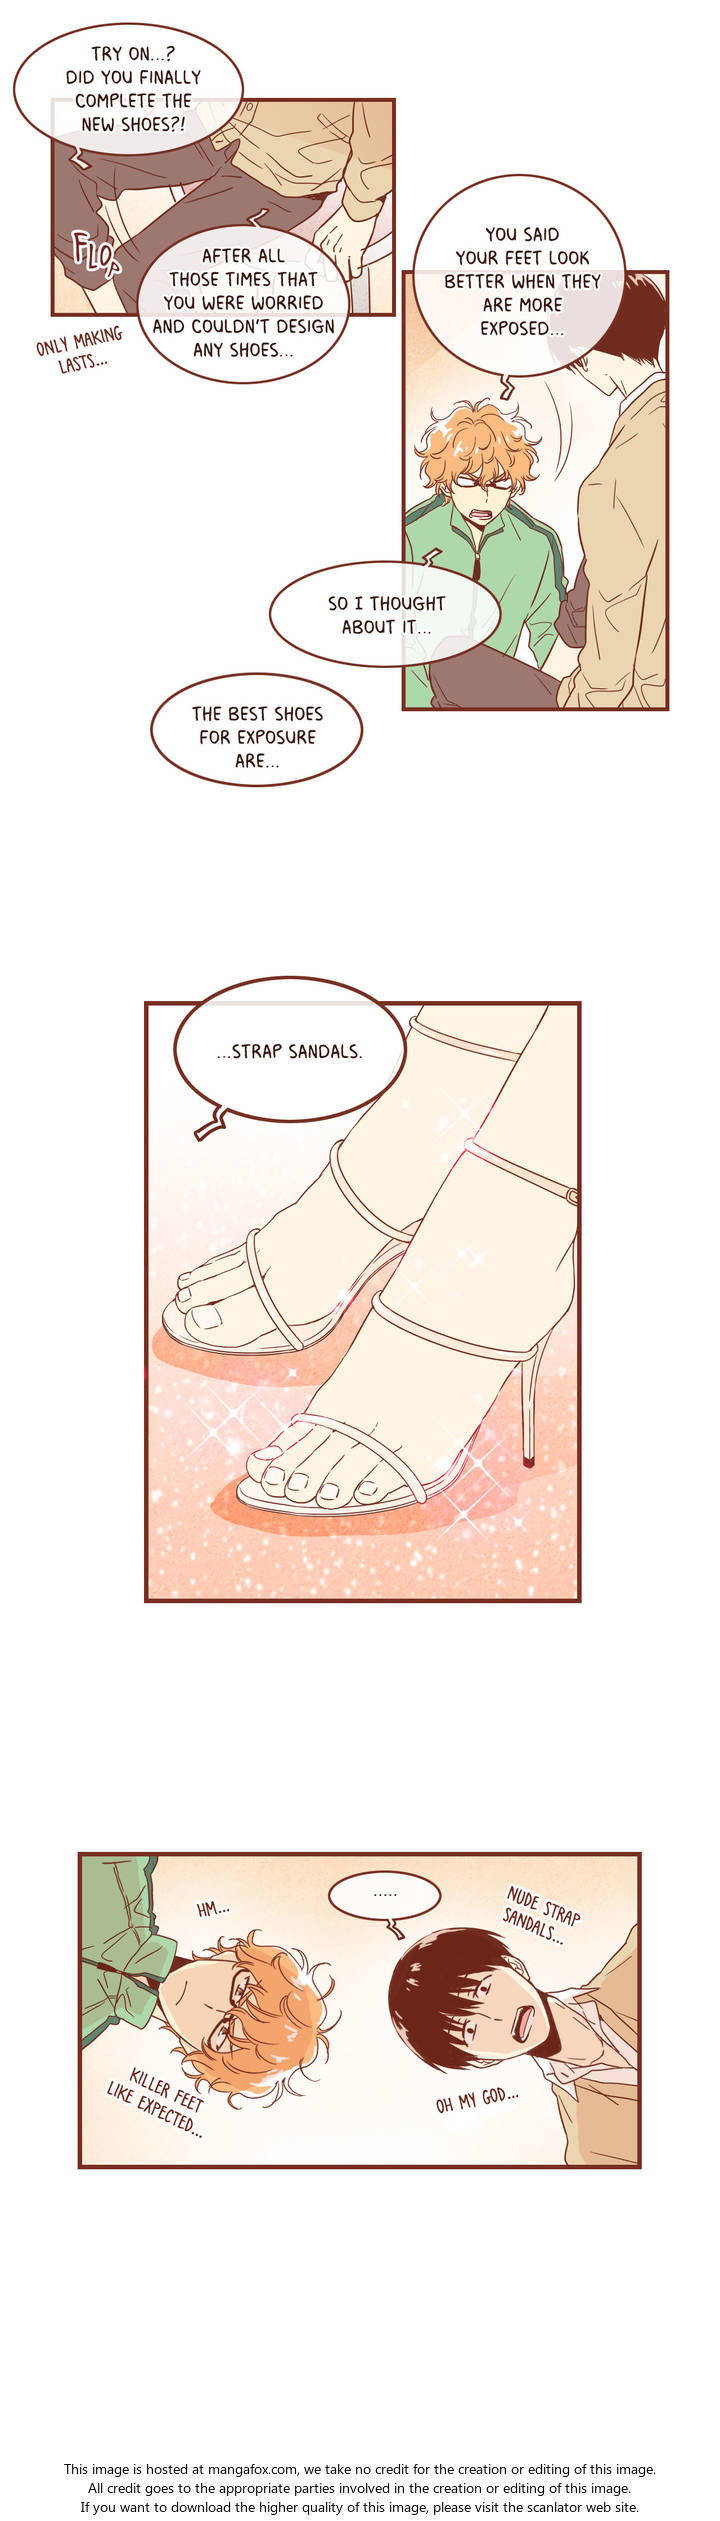 Why Did Men Stop Wearing High Heels? Chapter 028 page 8